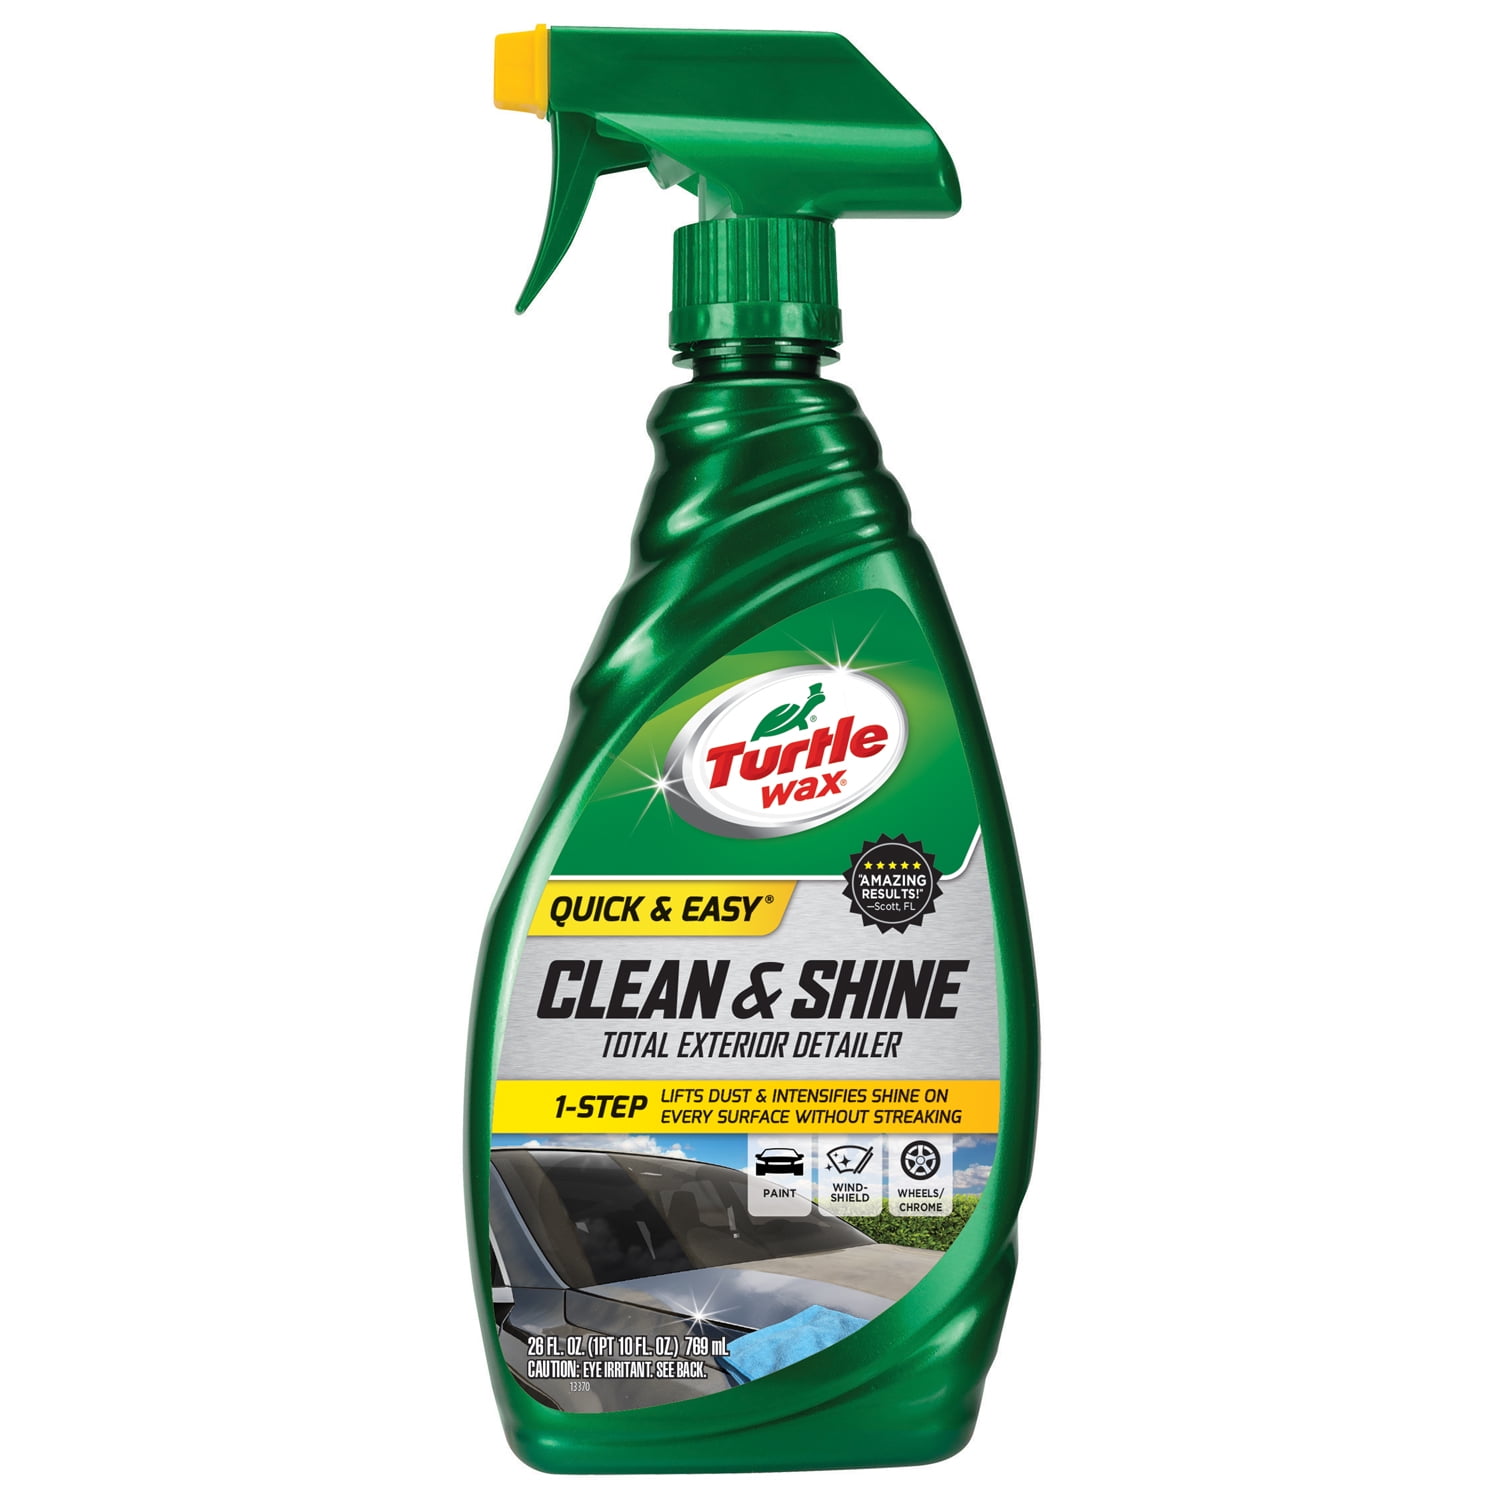 I use this product every time I wash my car. What is the best Turtle Wax  topper to apply after using it? : r/AutoDetailing